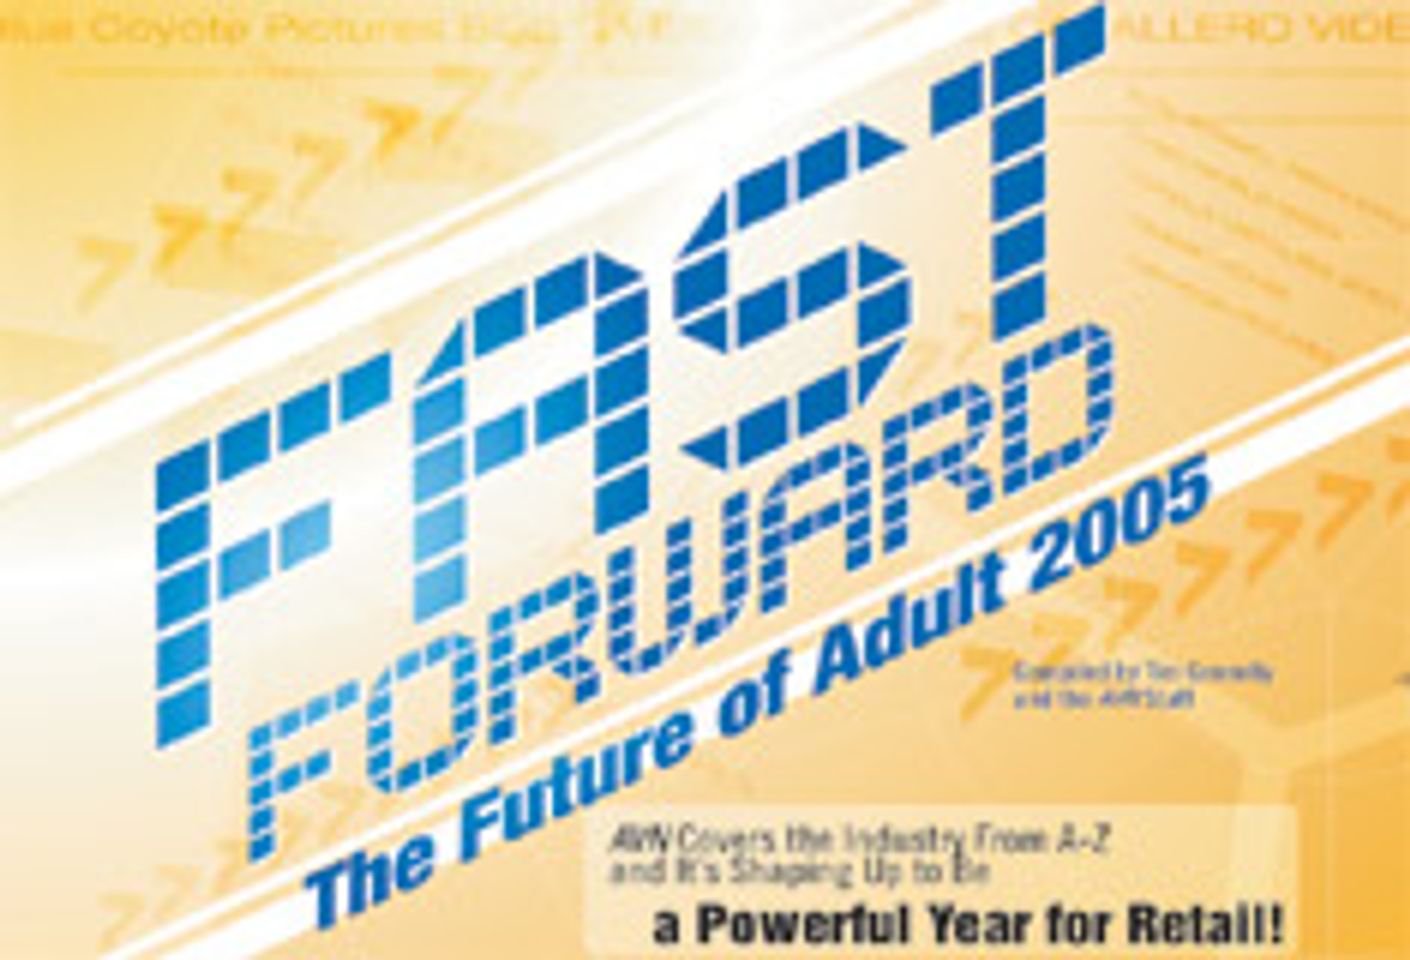 ADULTVIDEONEWS FEBRUARY 2005 - ON THE COVER - FAST FORWARD: The Future of Adult 2005